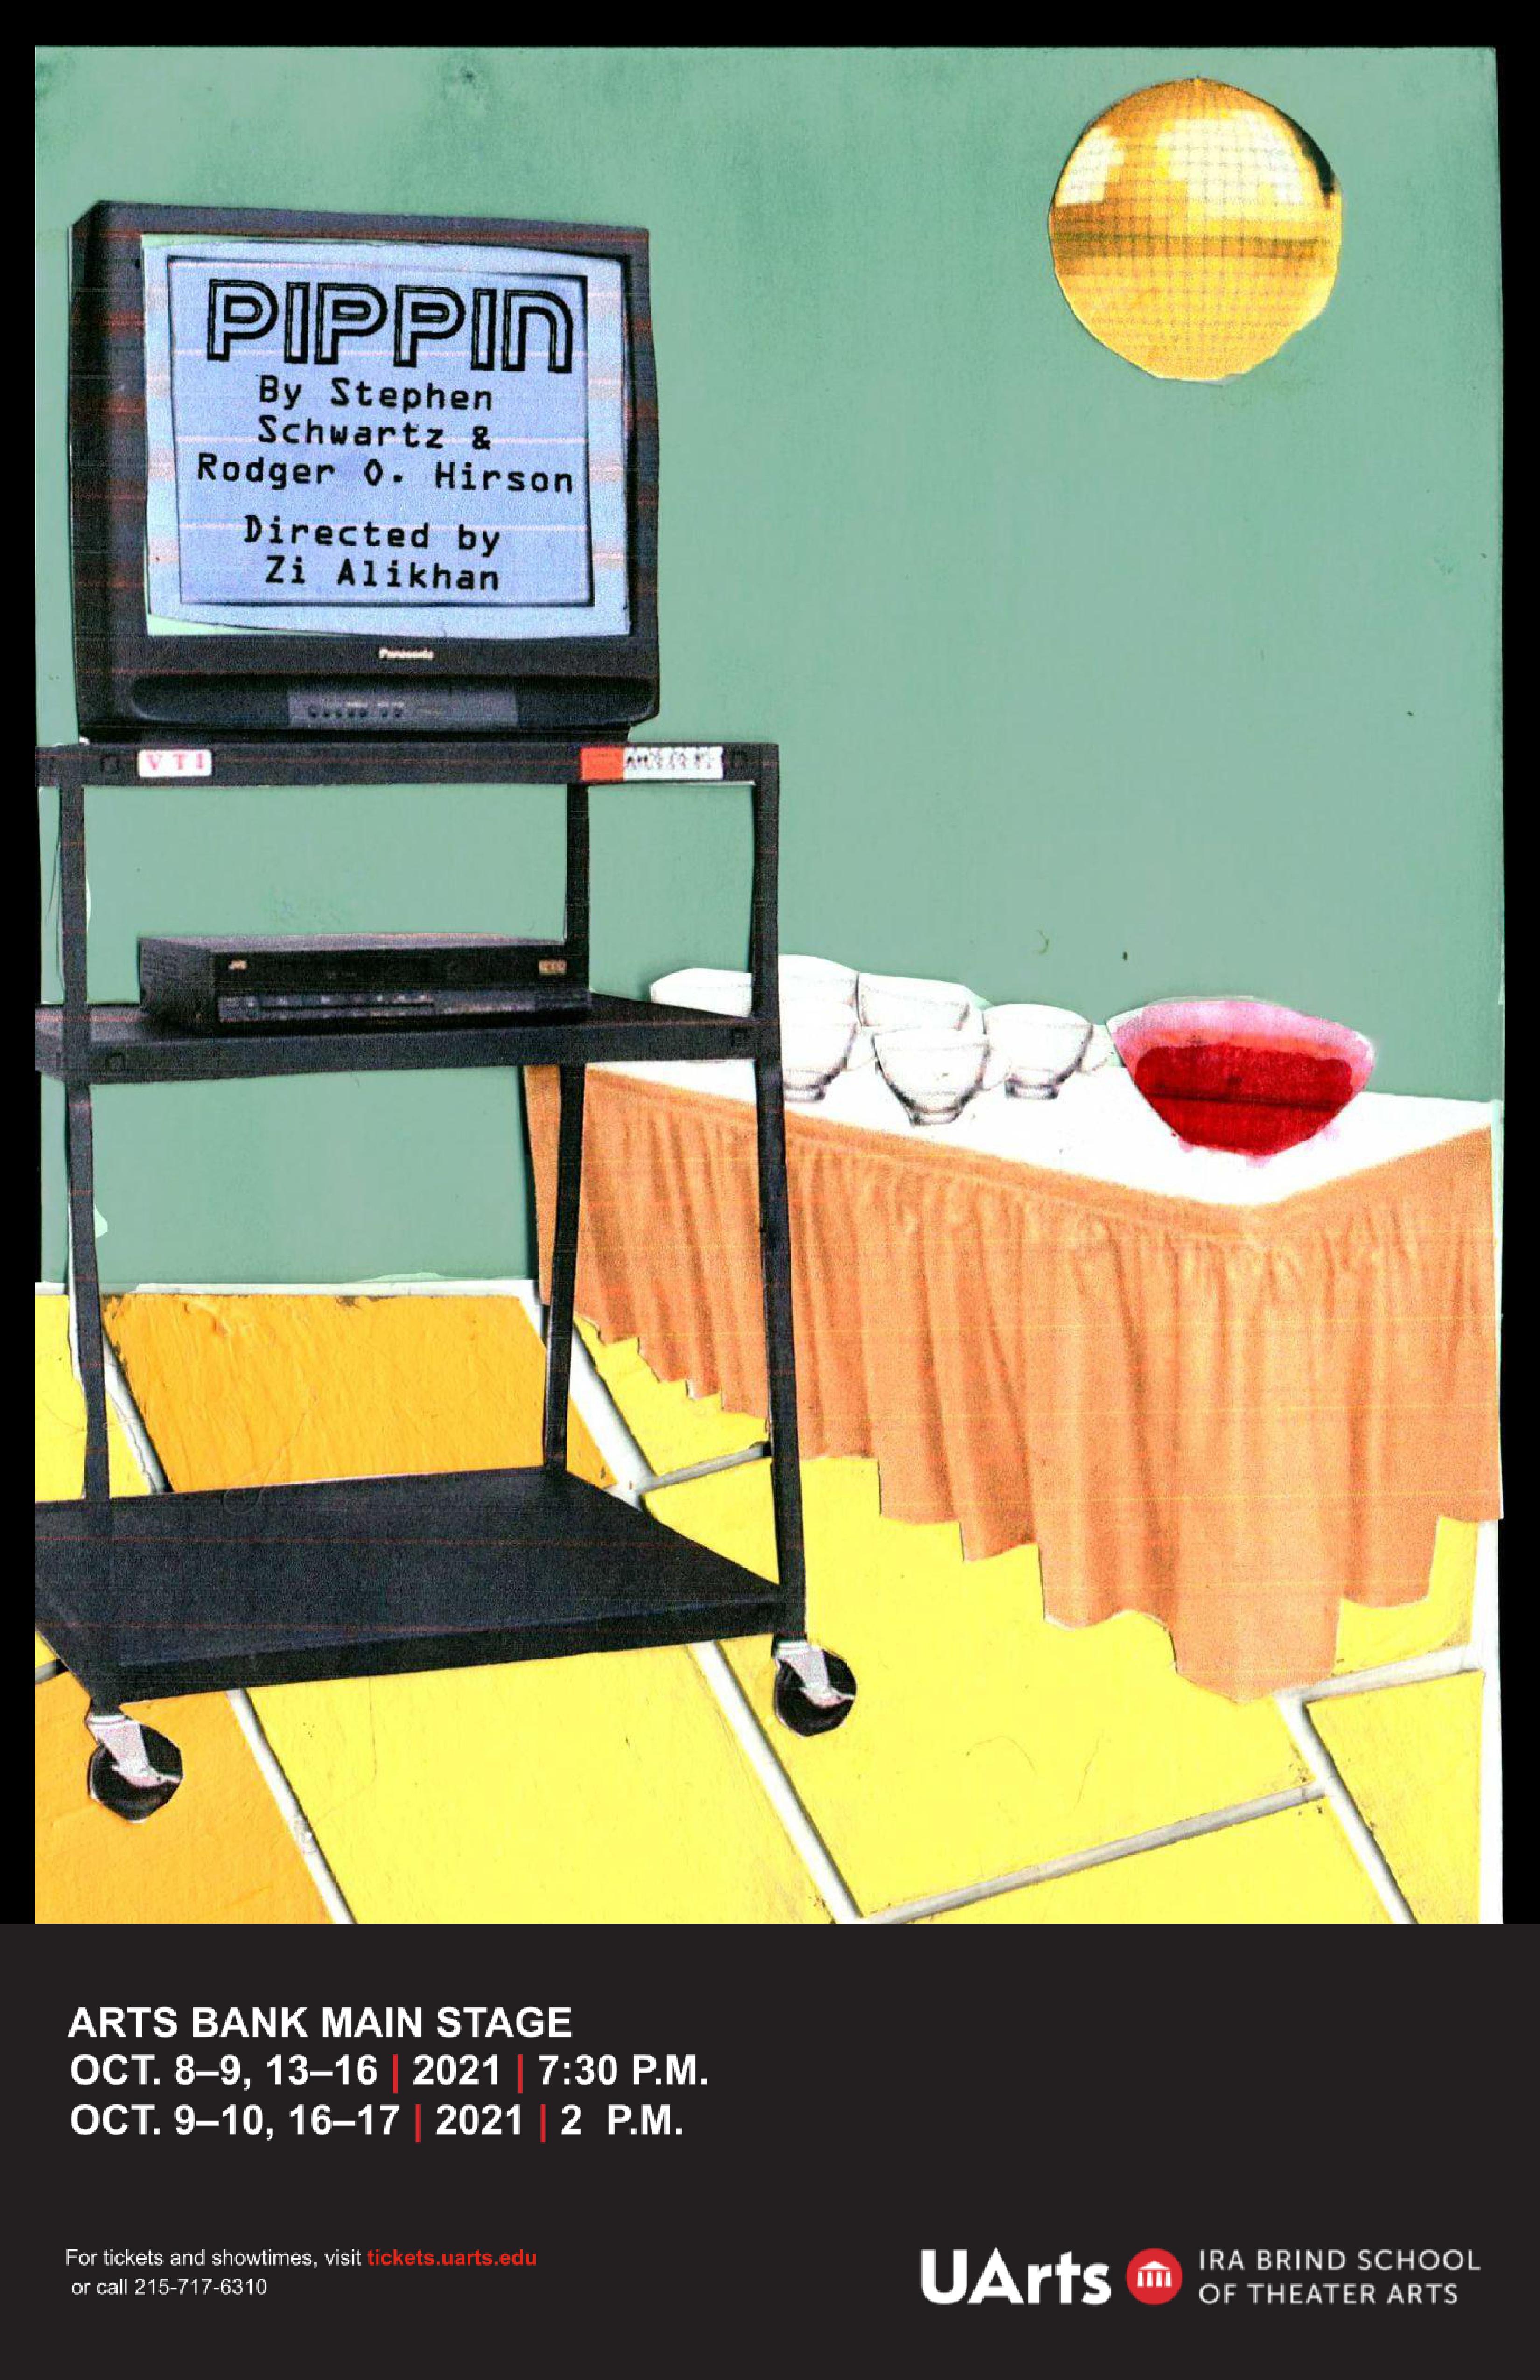 Yellow tile floor with a teal wall, there's an orange table and black stand alone TV. On the table is a bowl of red punch with glasses, with a golden disco ball on the ceiling. The TV reads "Pippin By Stephen Schwartz & Rodger O. Hirson Directed by Zi Alikhan." The bottom states "Arts Bank Main Stage Oct. 8-9, 13-16, 2021 7:30 P.M. and Oct. 9-10, 16-17, 2021 2 P.M. For tickets and showtimes, visit tickets.uarts.edu or call 215-717-6310.”